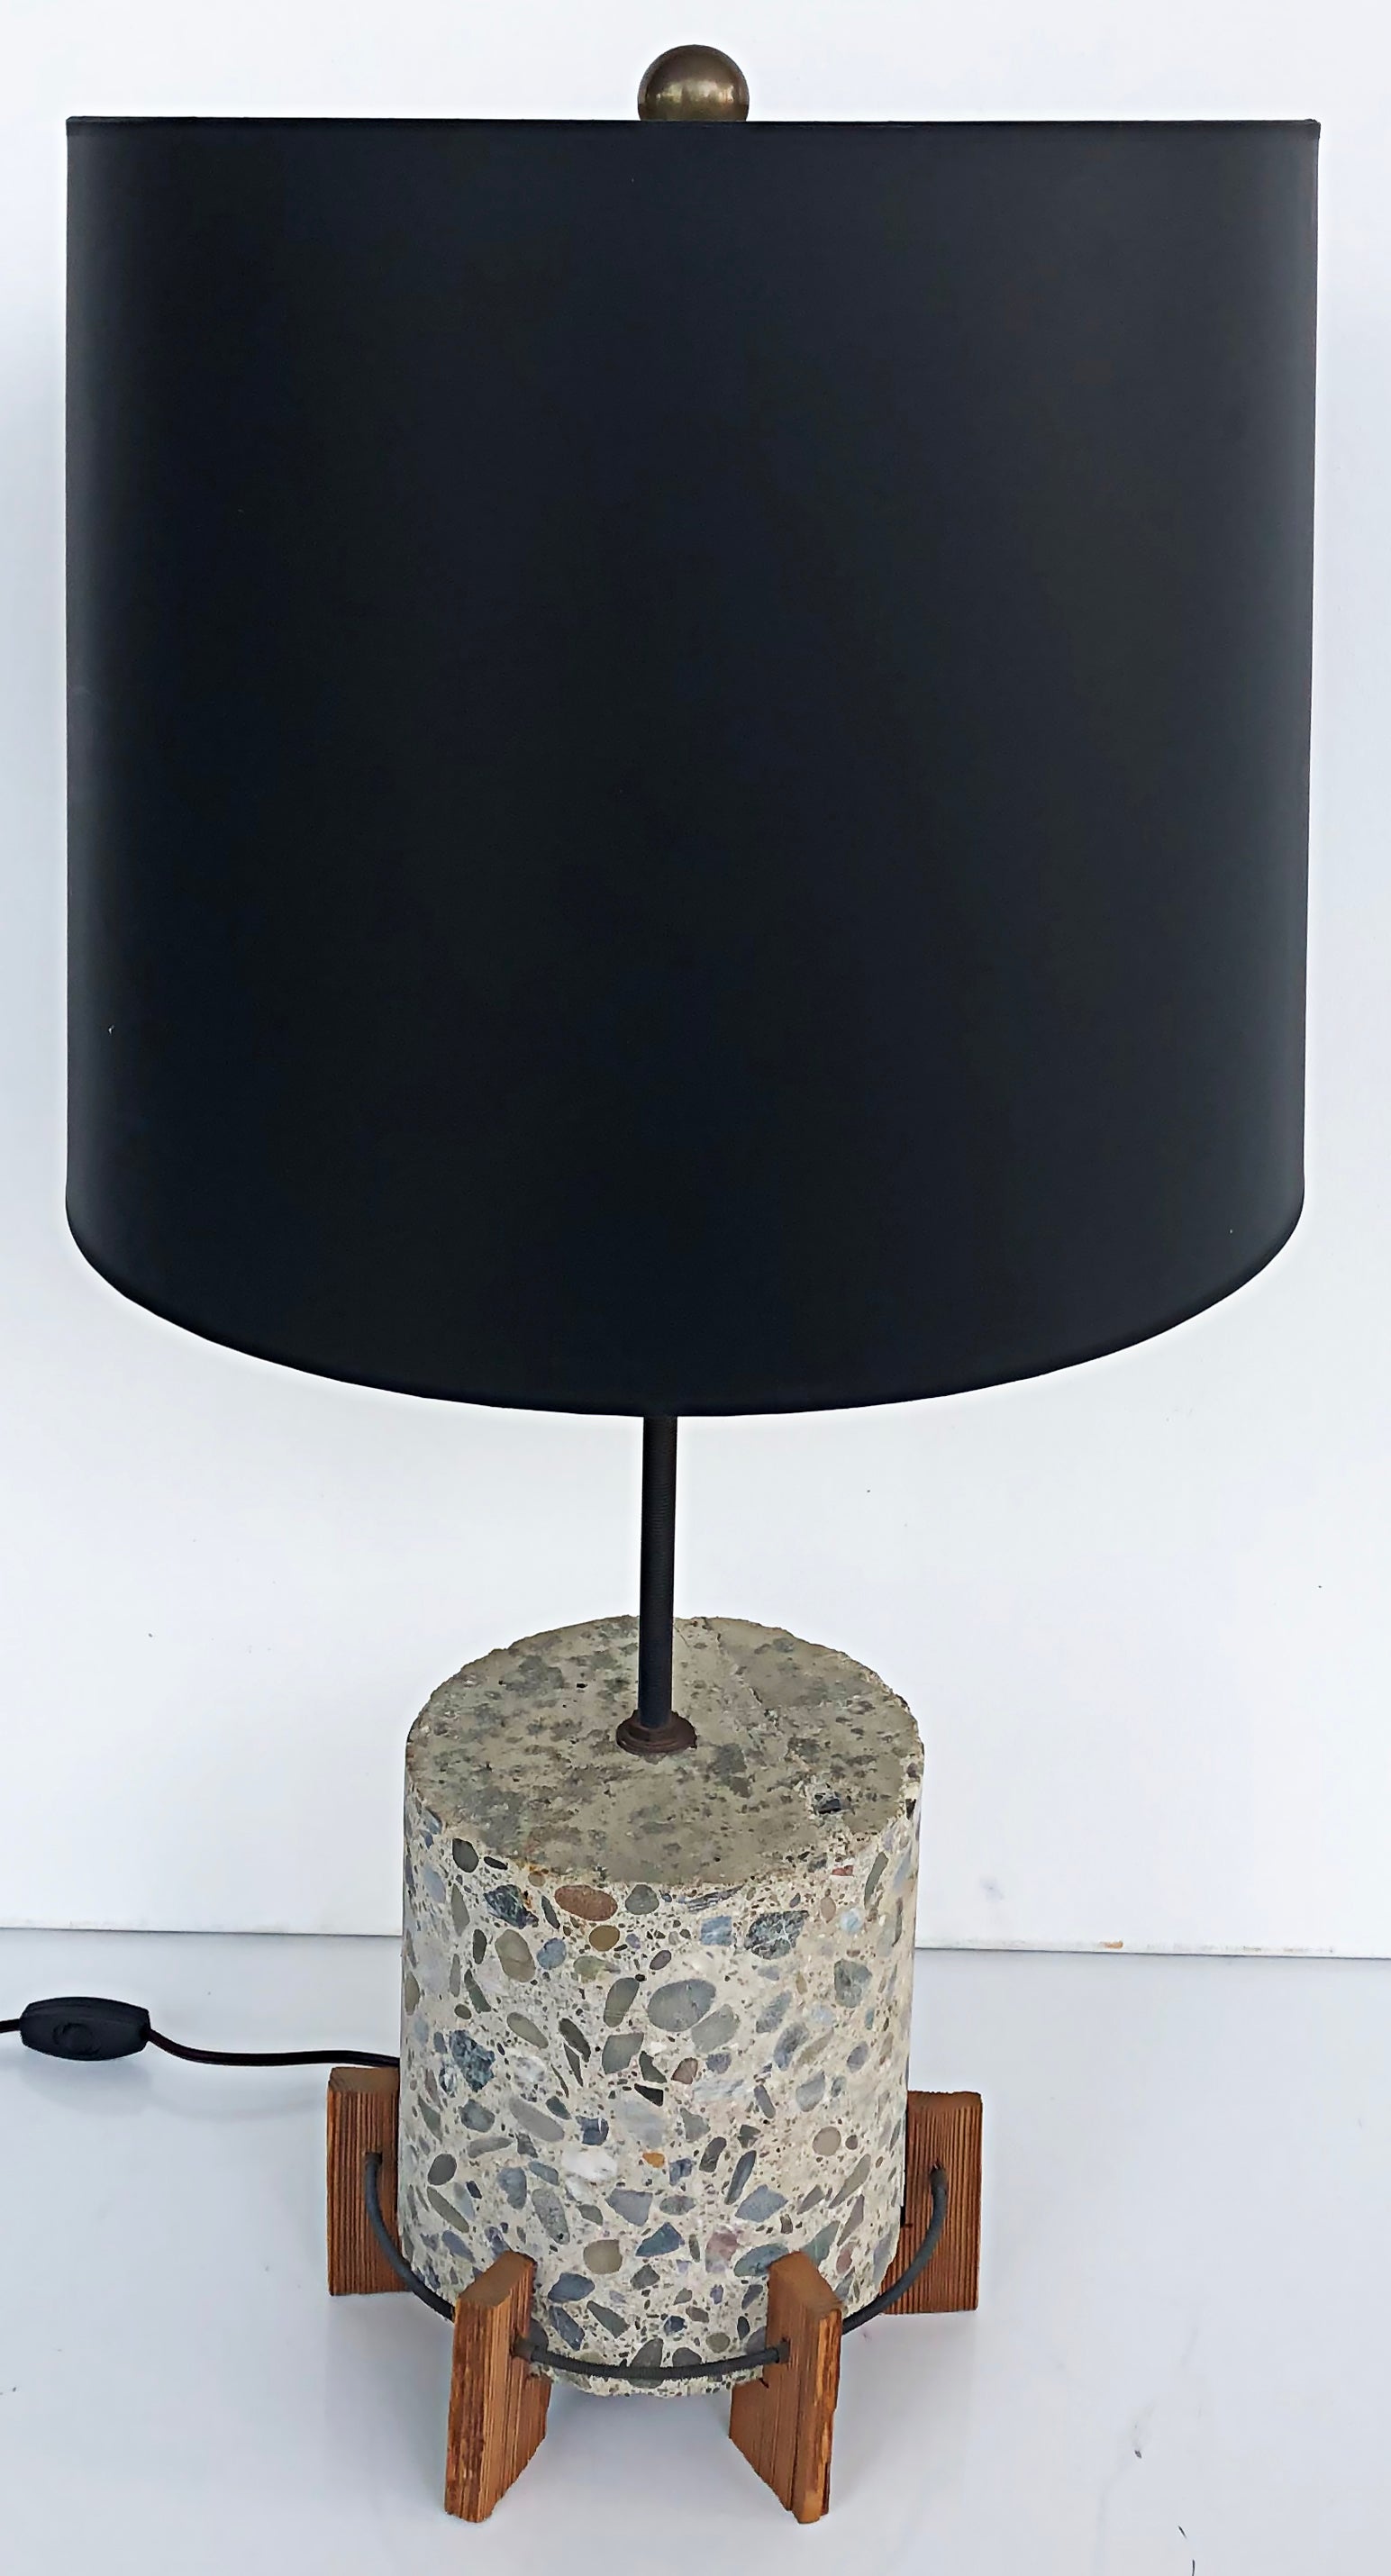 Vintage Richard Lee Parker Studio terrazzo wood table lamp, signed 1992.

Offered for sale is a vintage studio Terrazzo and wood table lamp. The lamp has an industrial feel and is somewhat rustic. The one-of-a-kind piece is signed by the artist and